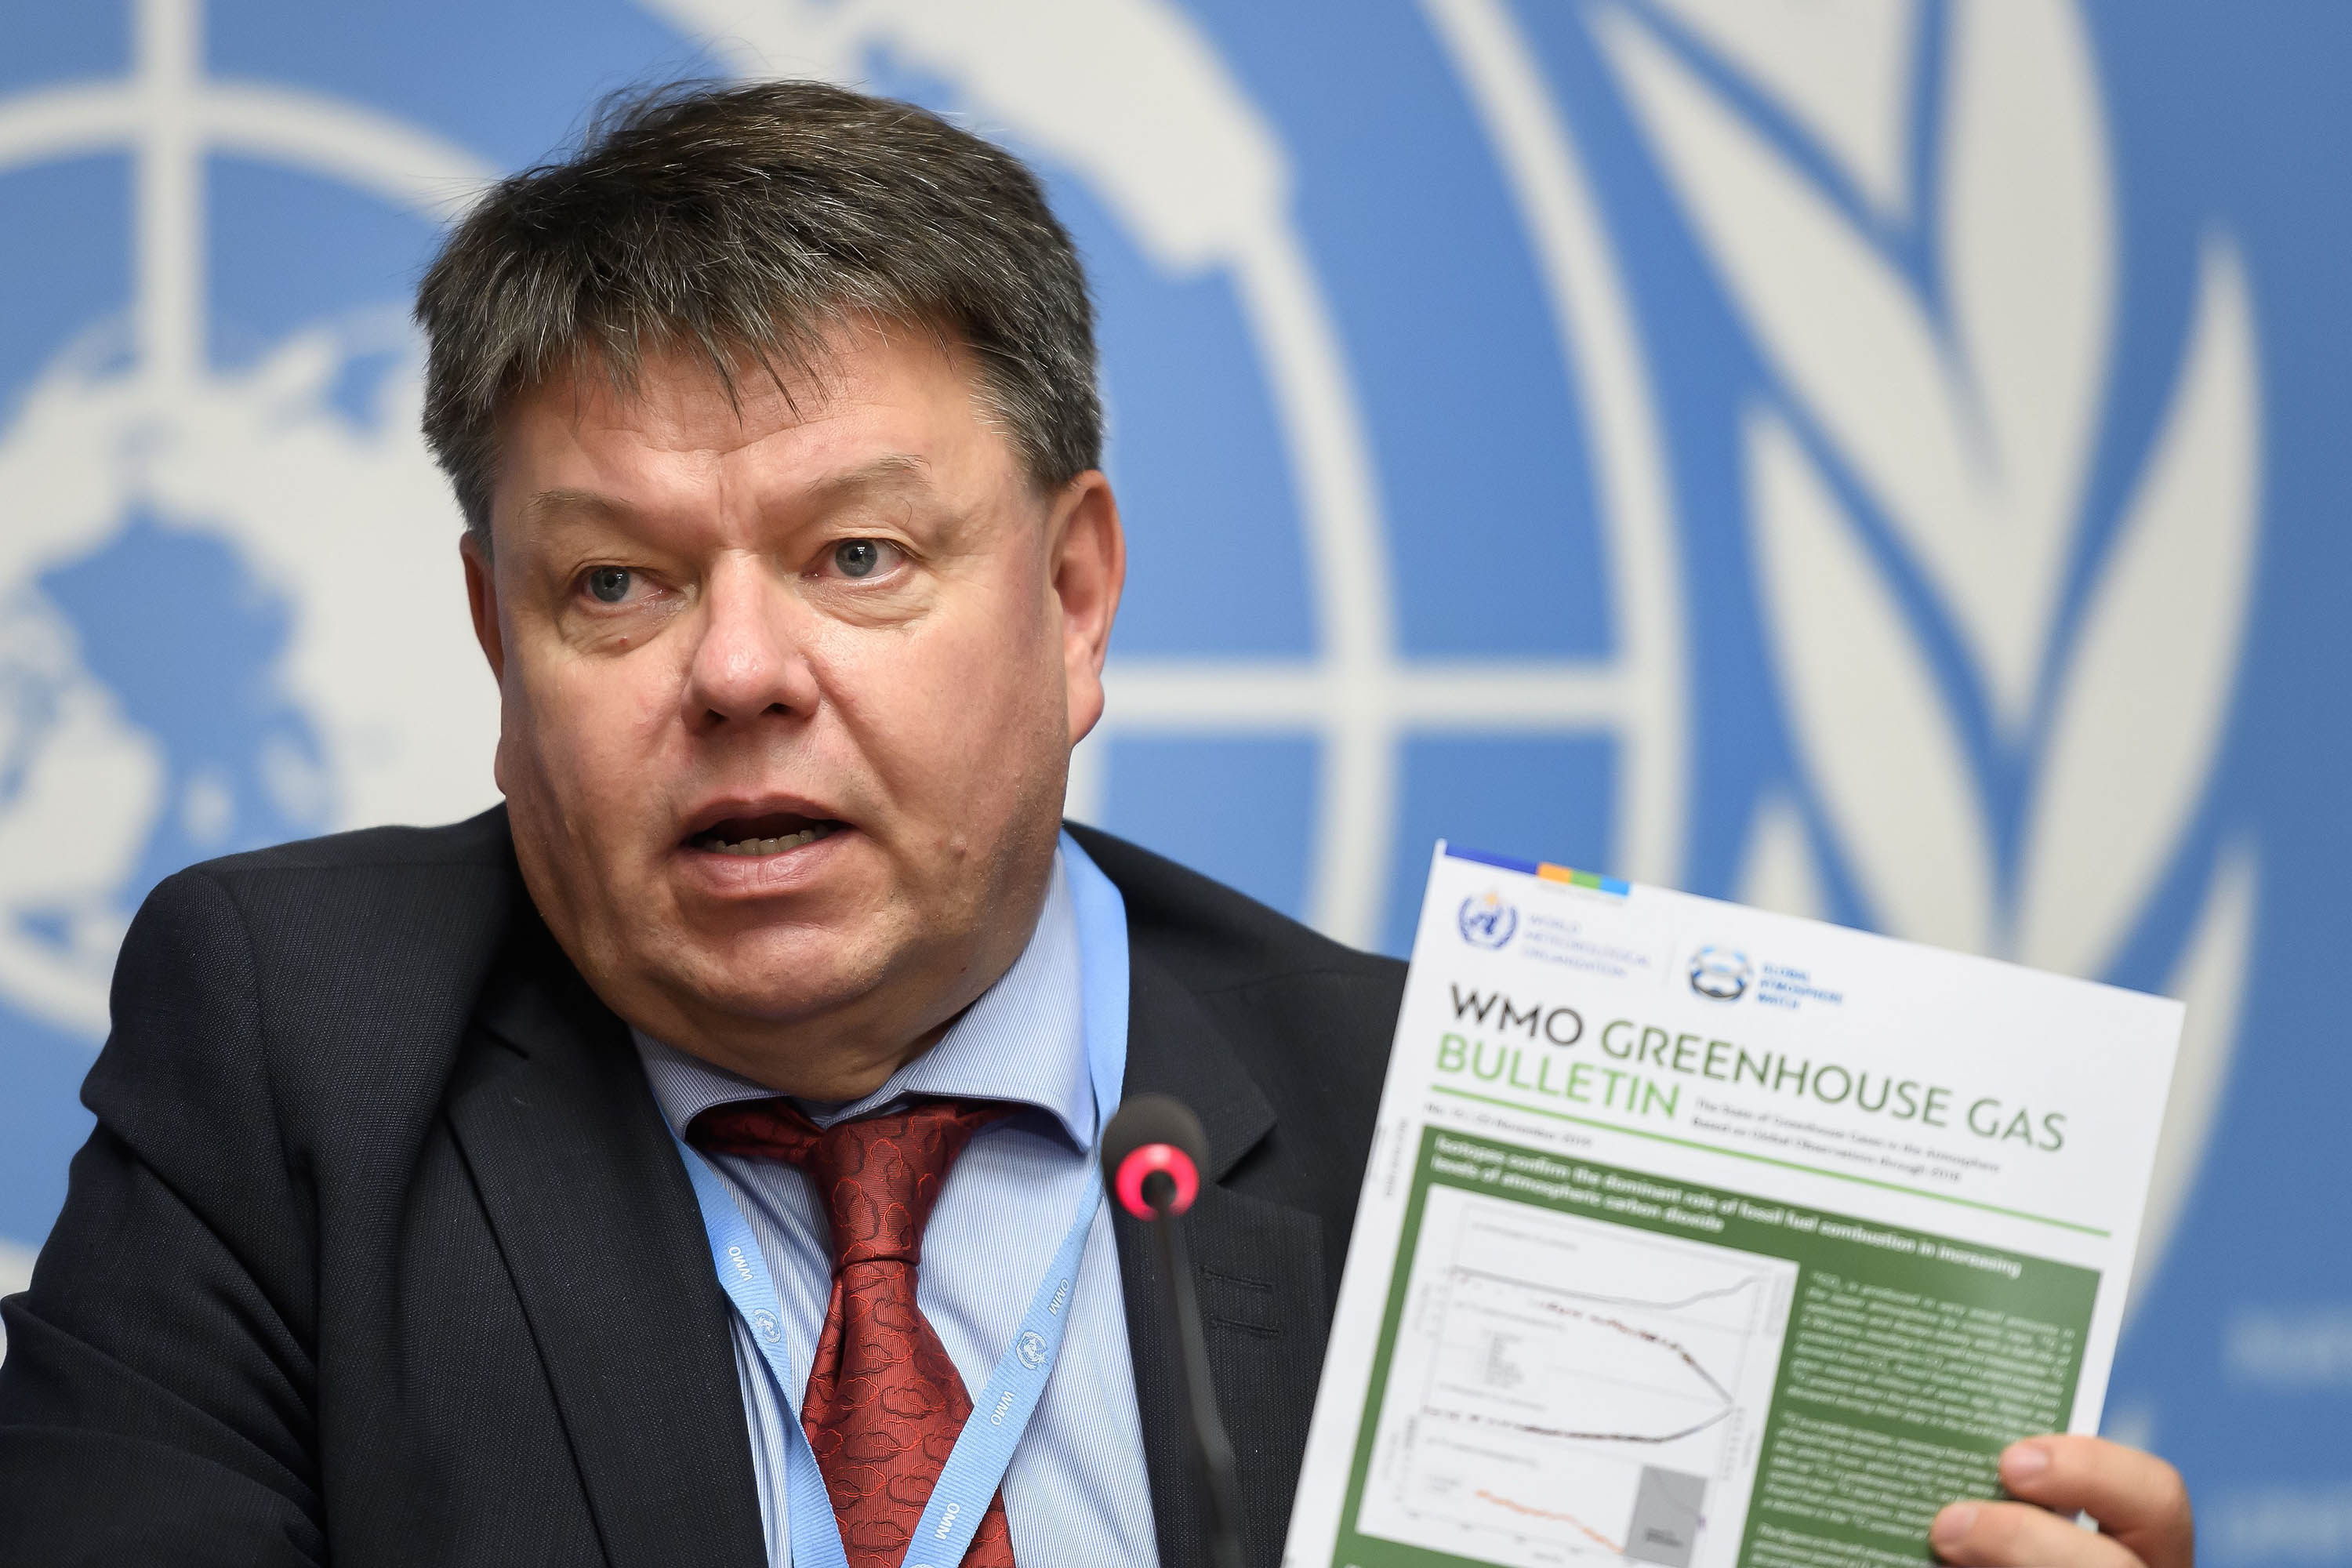 World Meteorological Organization (WMO) Secretary-General Petteri Taalas shows the Greenhouse Gas Bulletin during a press conference on atmospheric concentrations of CO2, in November 2019, in Geneva, Swizterland.